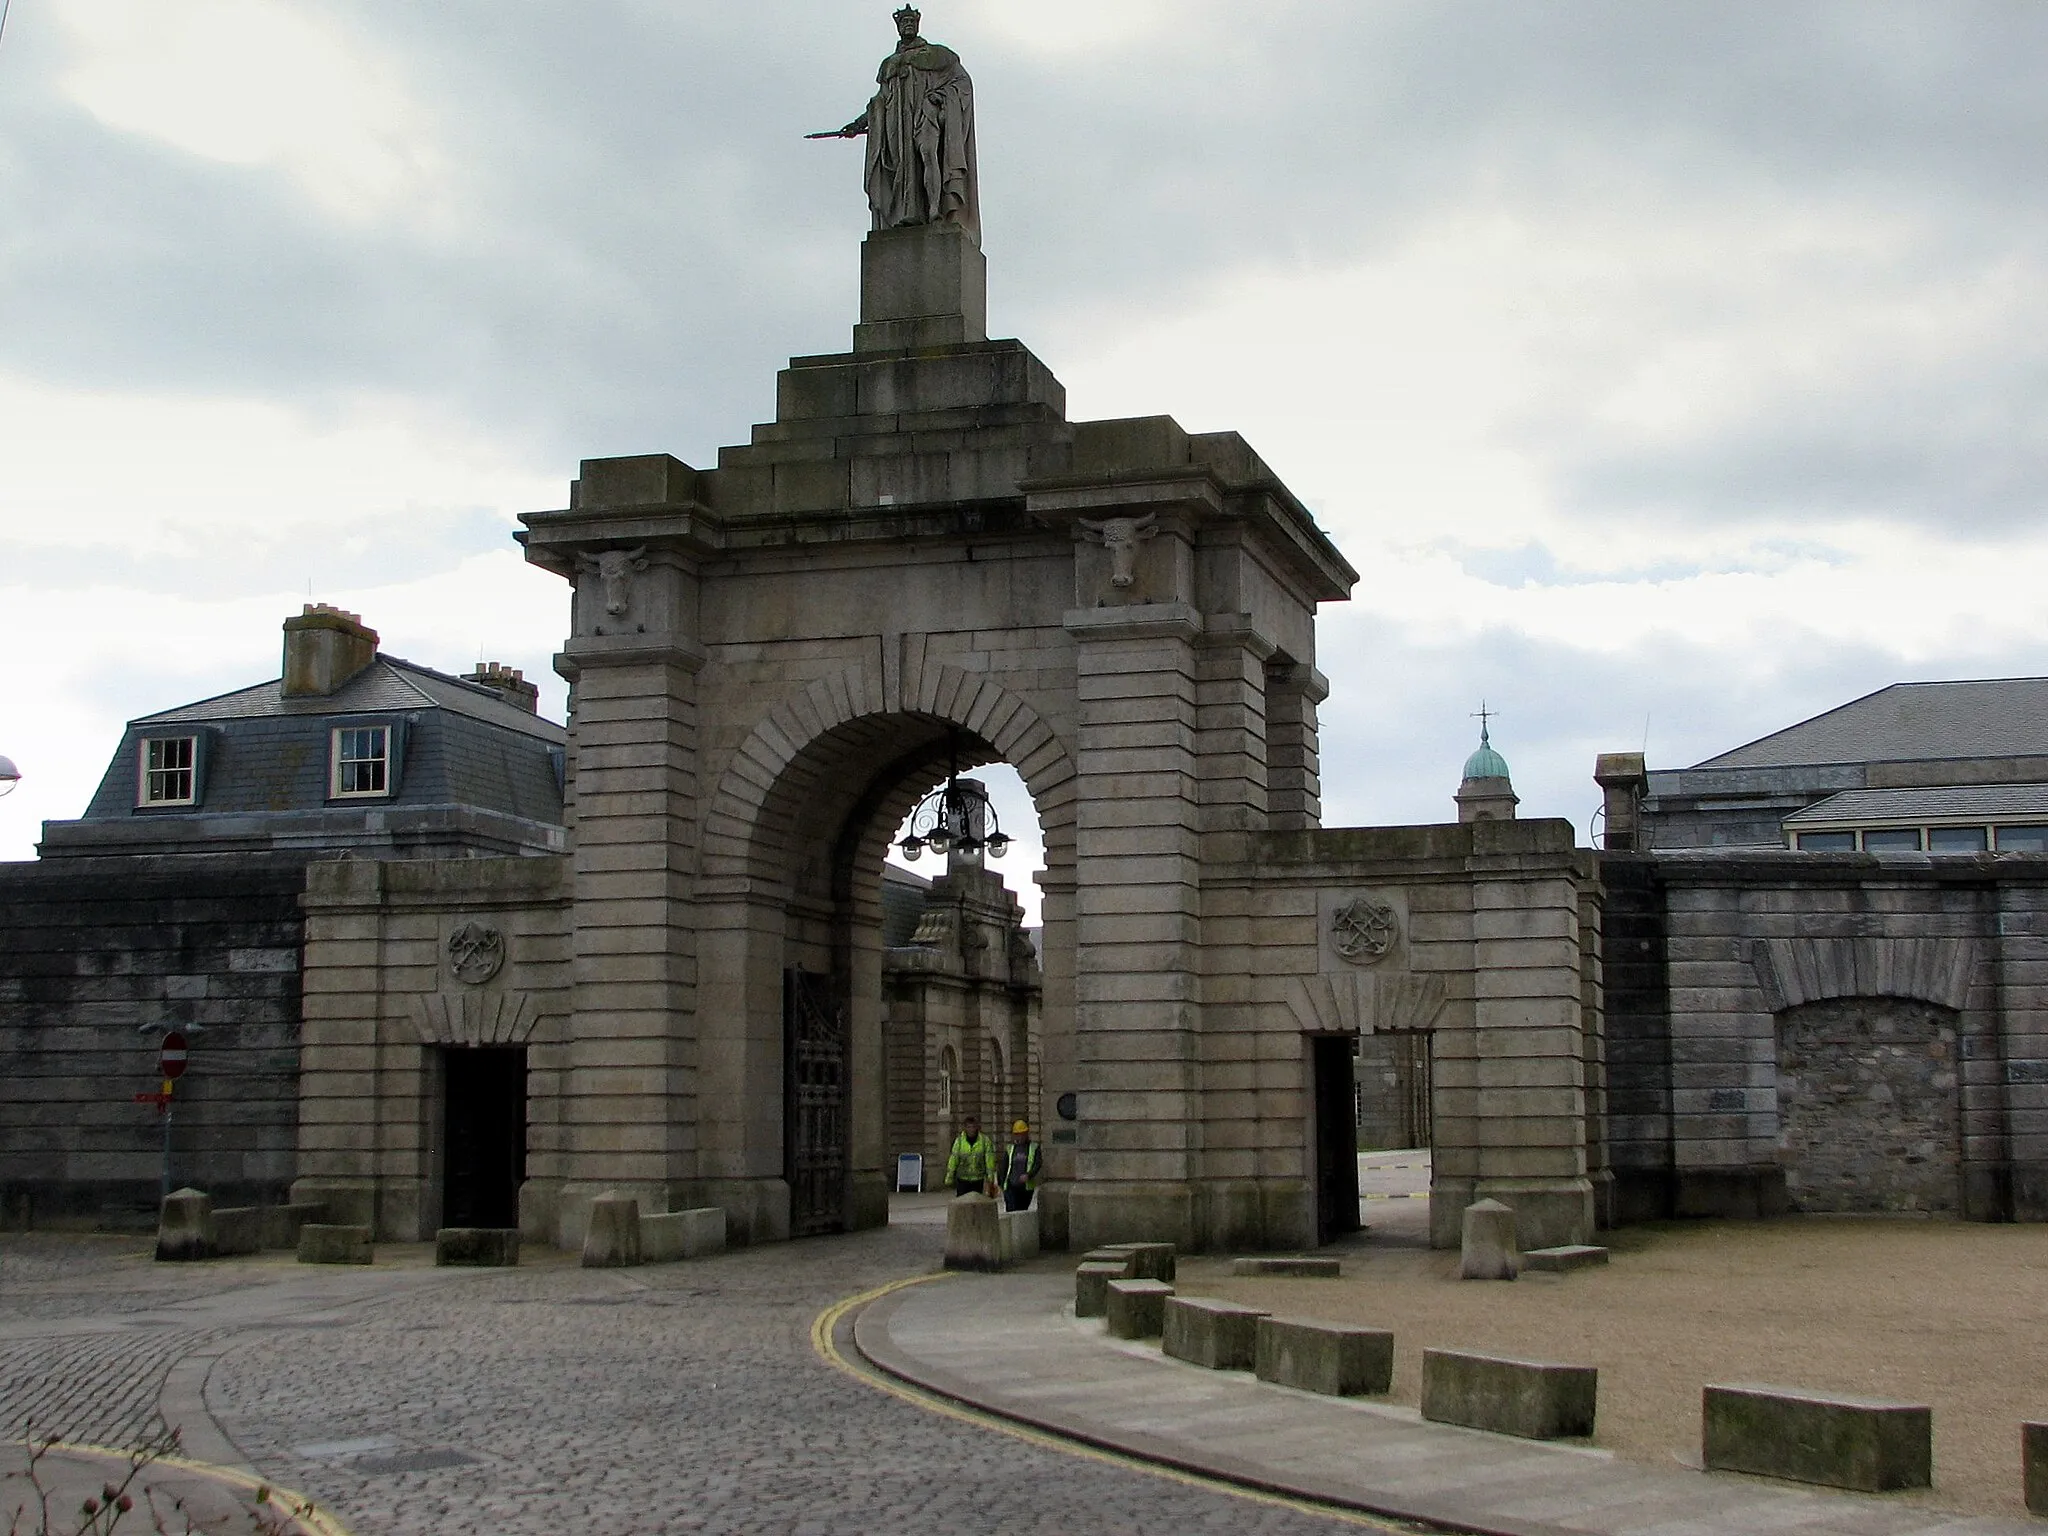 Photo showing: The impressive gateway to the Royal William Victualling Yard, Plymouth, Devon, England. The Yard was designed by Sir John Rennie in 1825-33 and this gateway is surmounted by a 13 foot statue of William IV.